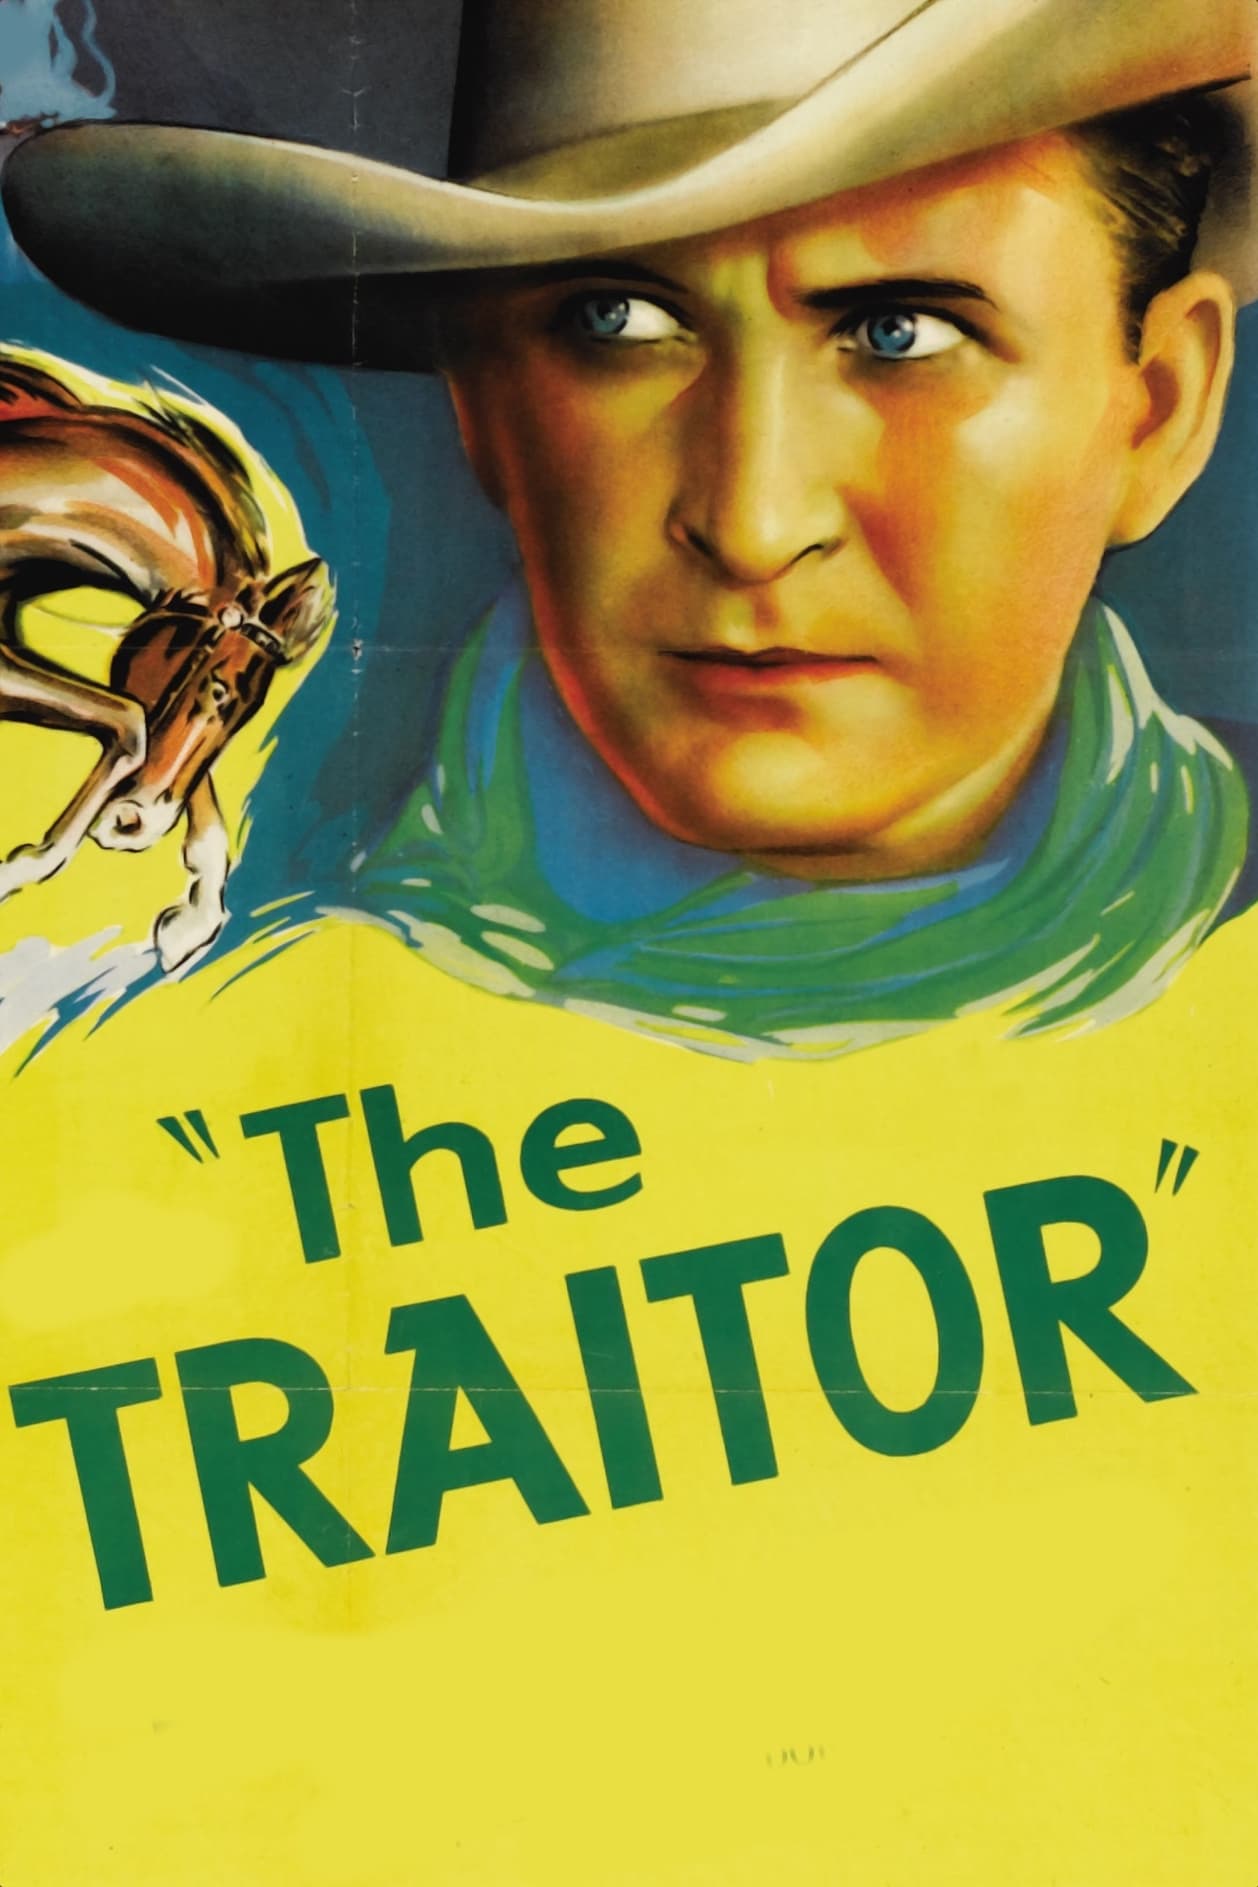 The Traitor (1936)